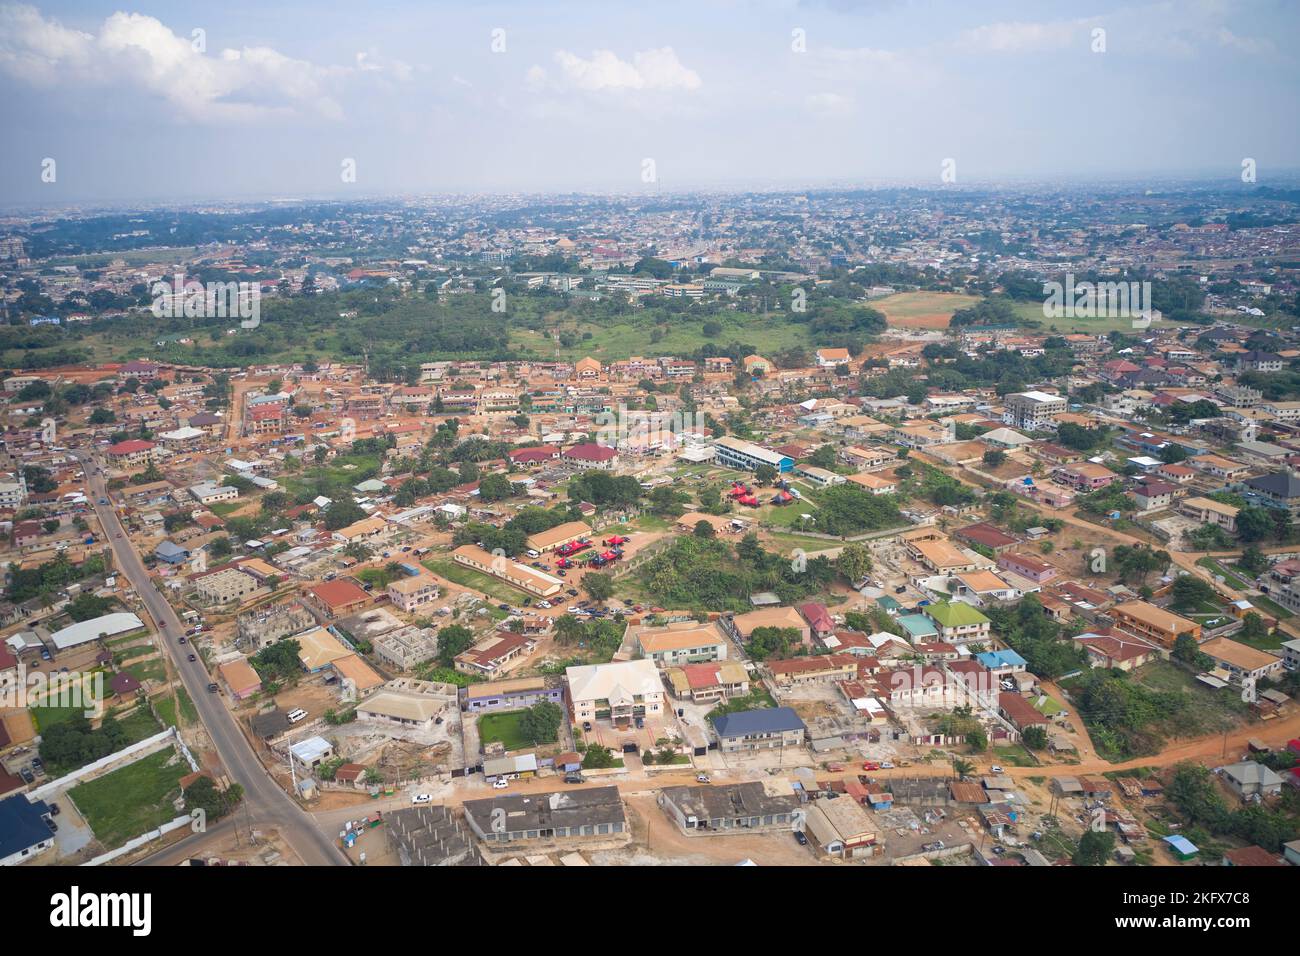 An aerial view of the skyline of the town of Kumasi, Ghana Stock Photo